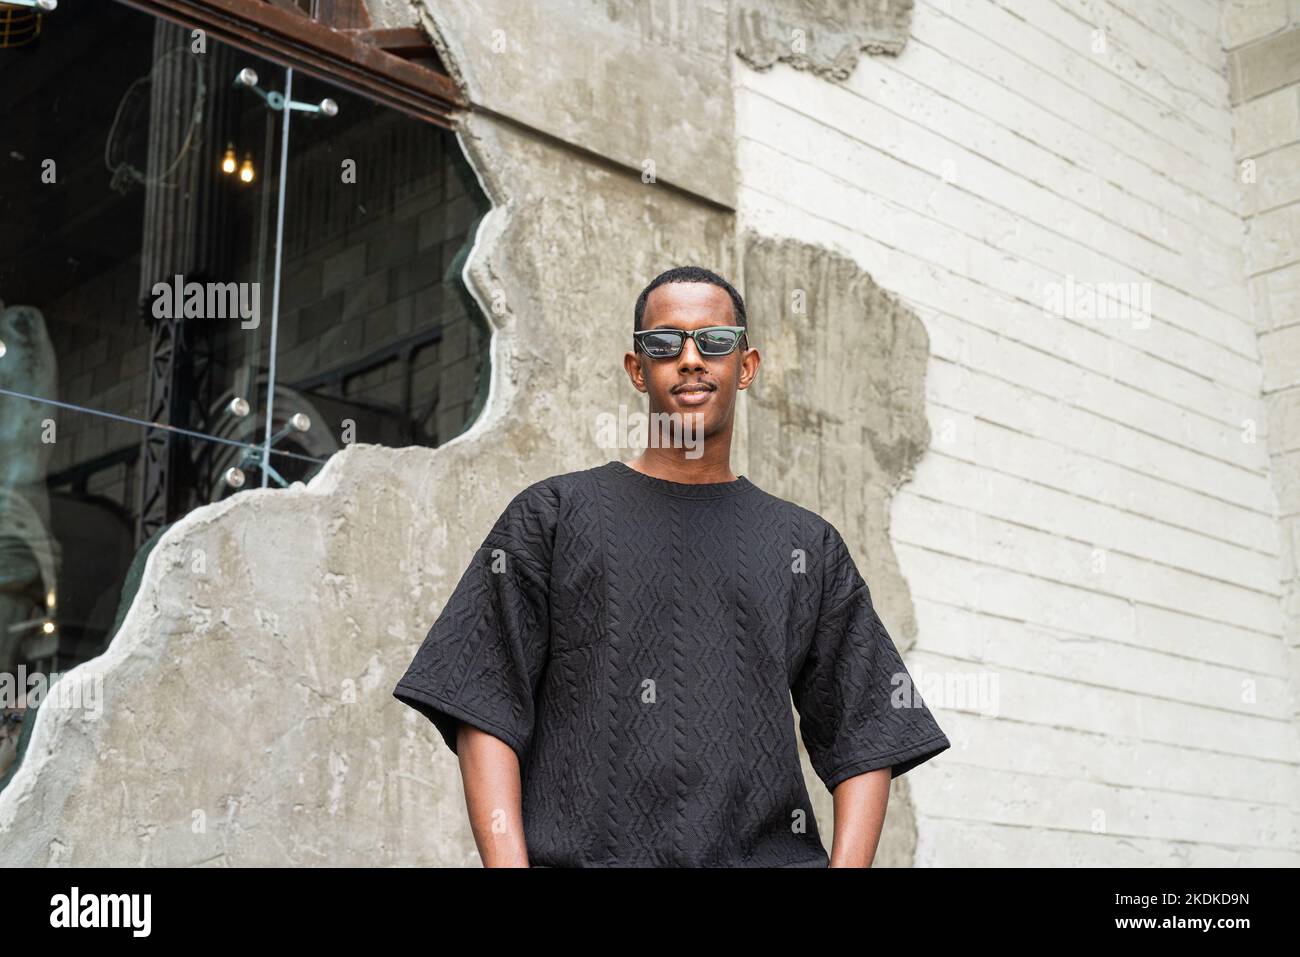 Portrait of handsome young black man wearing sunglasses outdoors Stock Photo